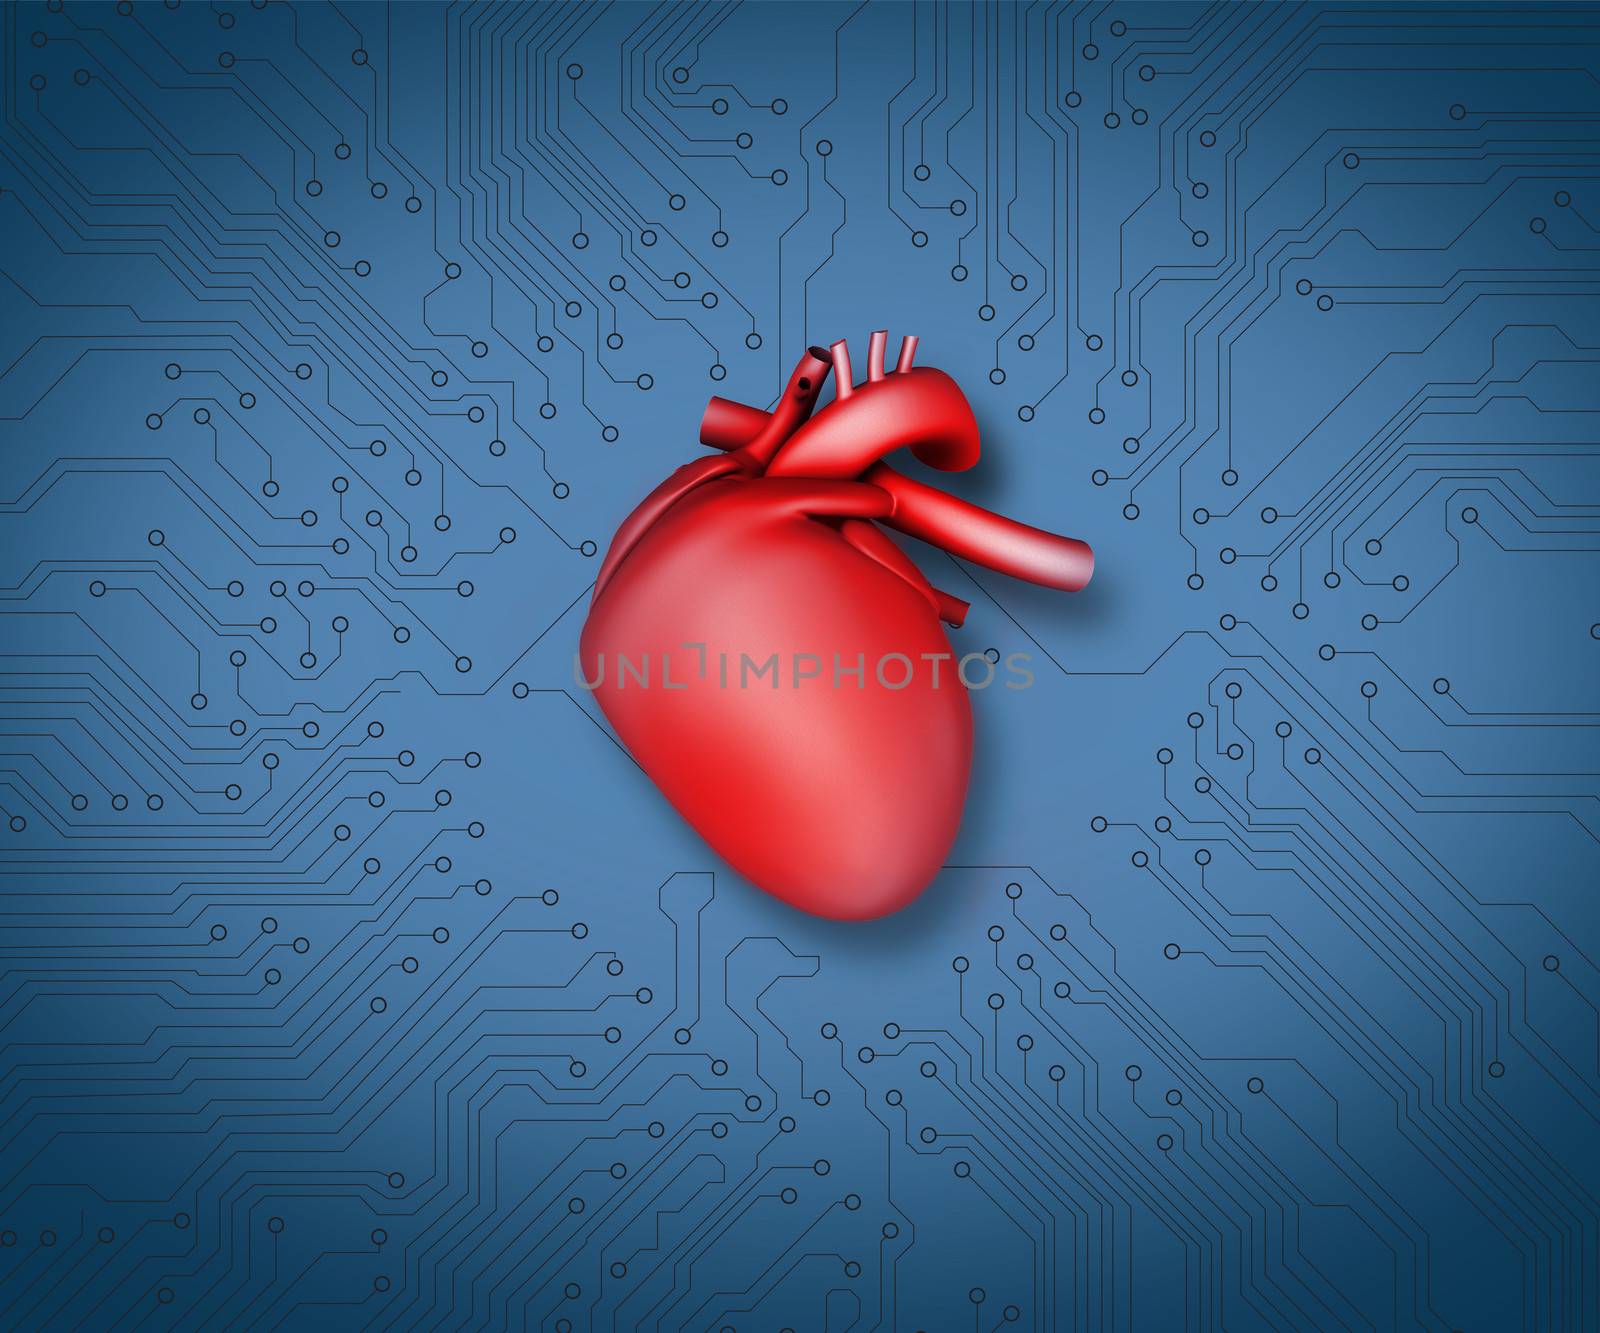 Diagram of a heart and technology in blue